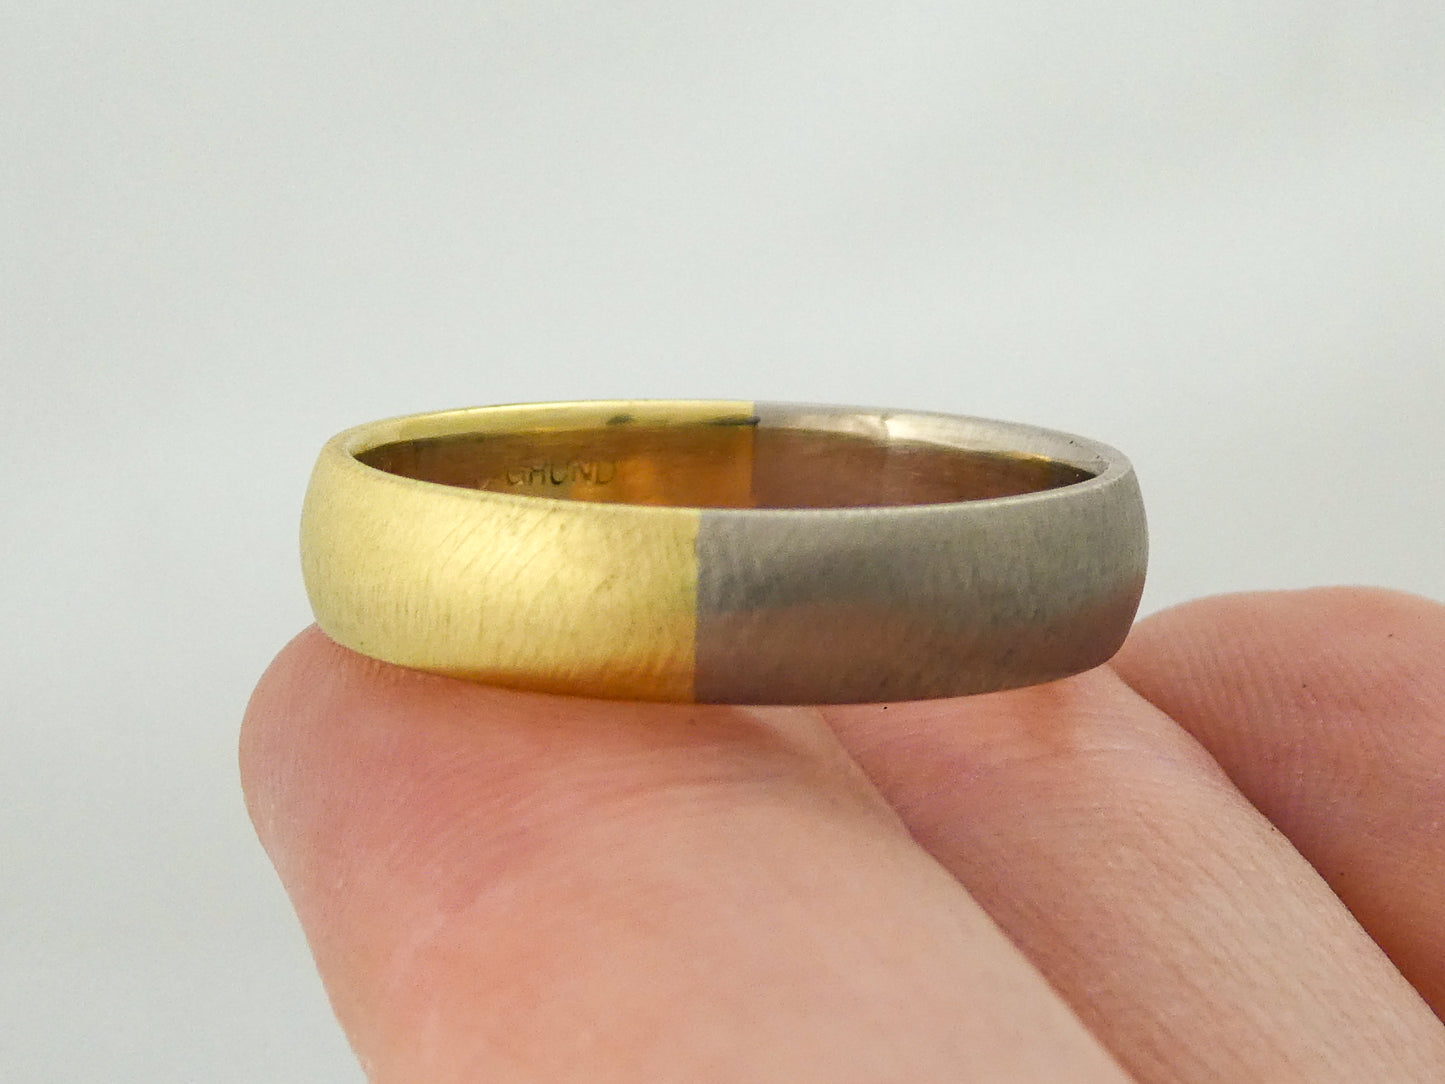 Platinum and 18k Yellow Gold Domed Wedding Ring | 5mm wide 50/50 Partnership in Mixed Precious Metals